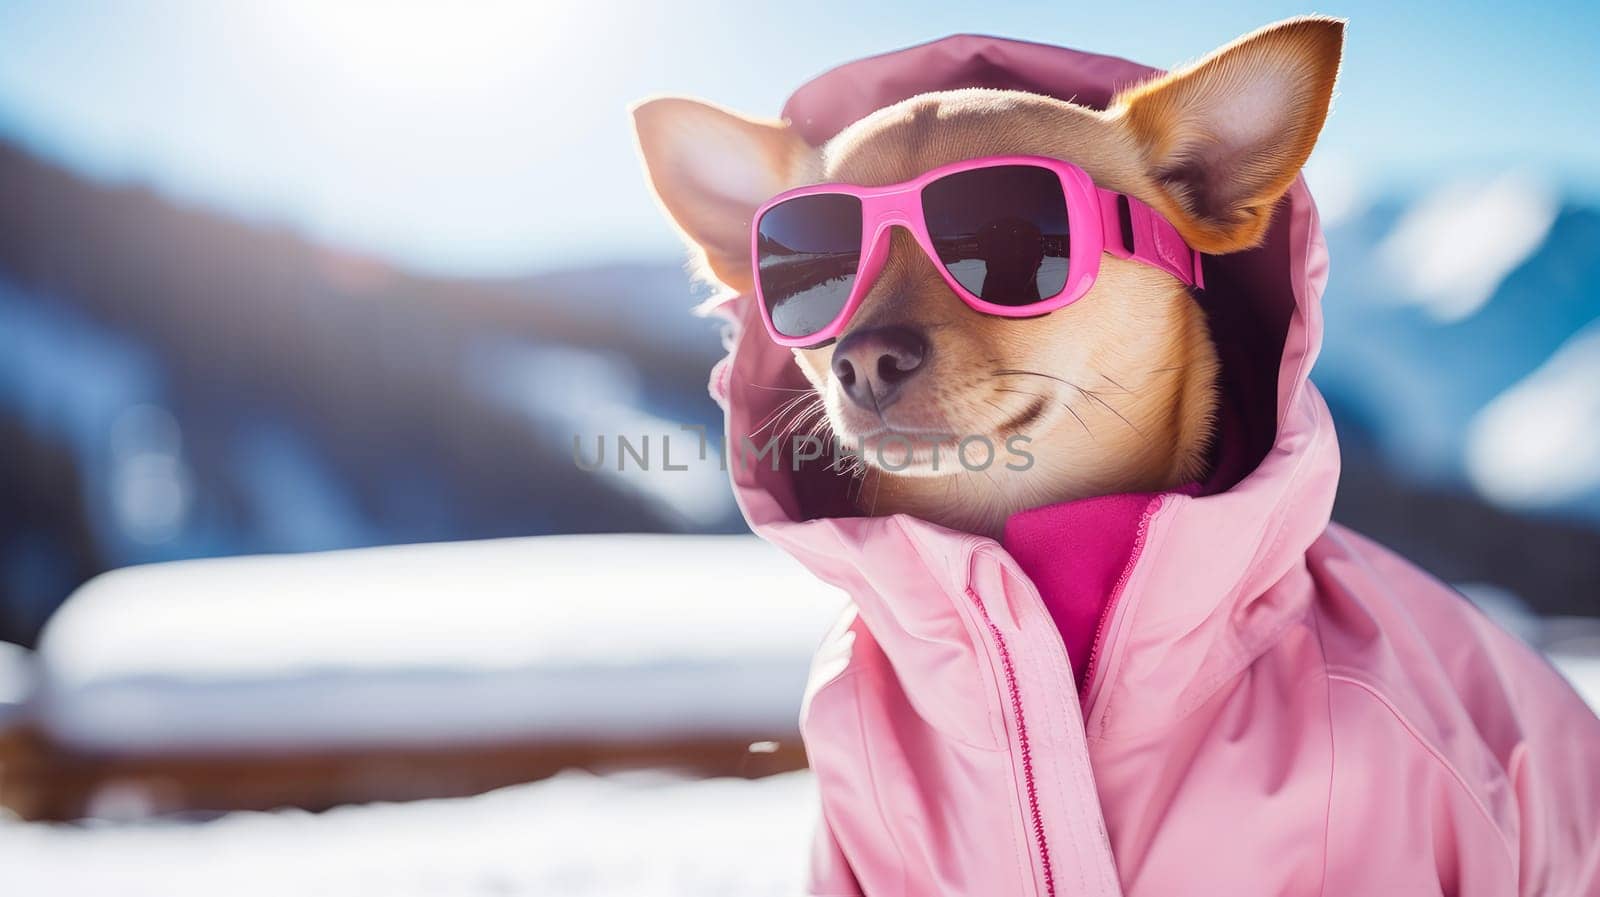 A happy, active, small, cheerful dog in a pink jacket and glasses runs through the snow overlooking a snowy landscape of a forest and mountains, at a ski resort. by Alla_Yurtayeva